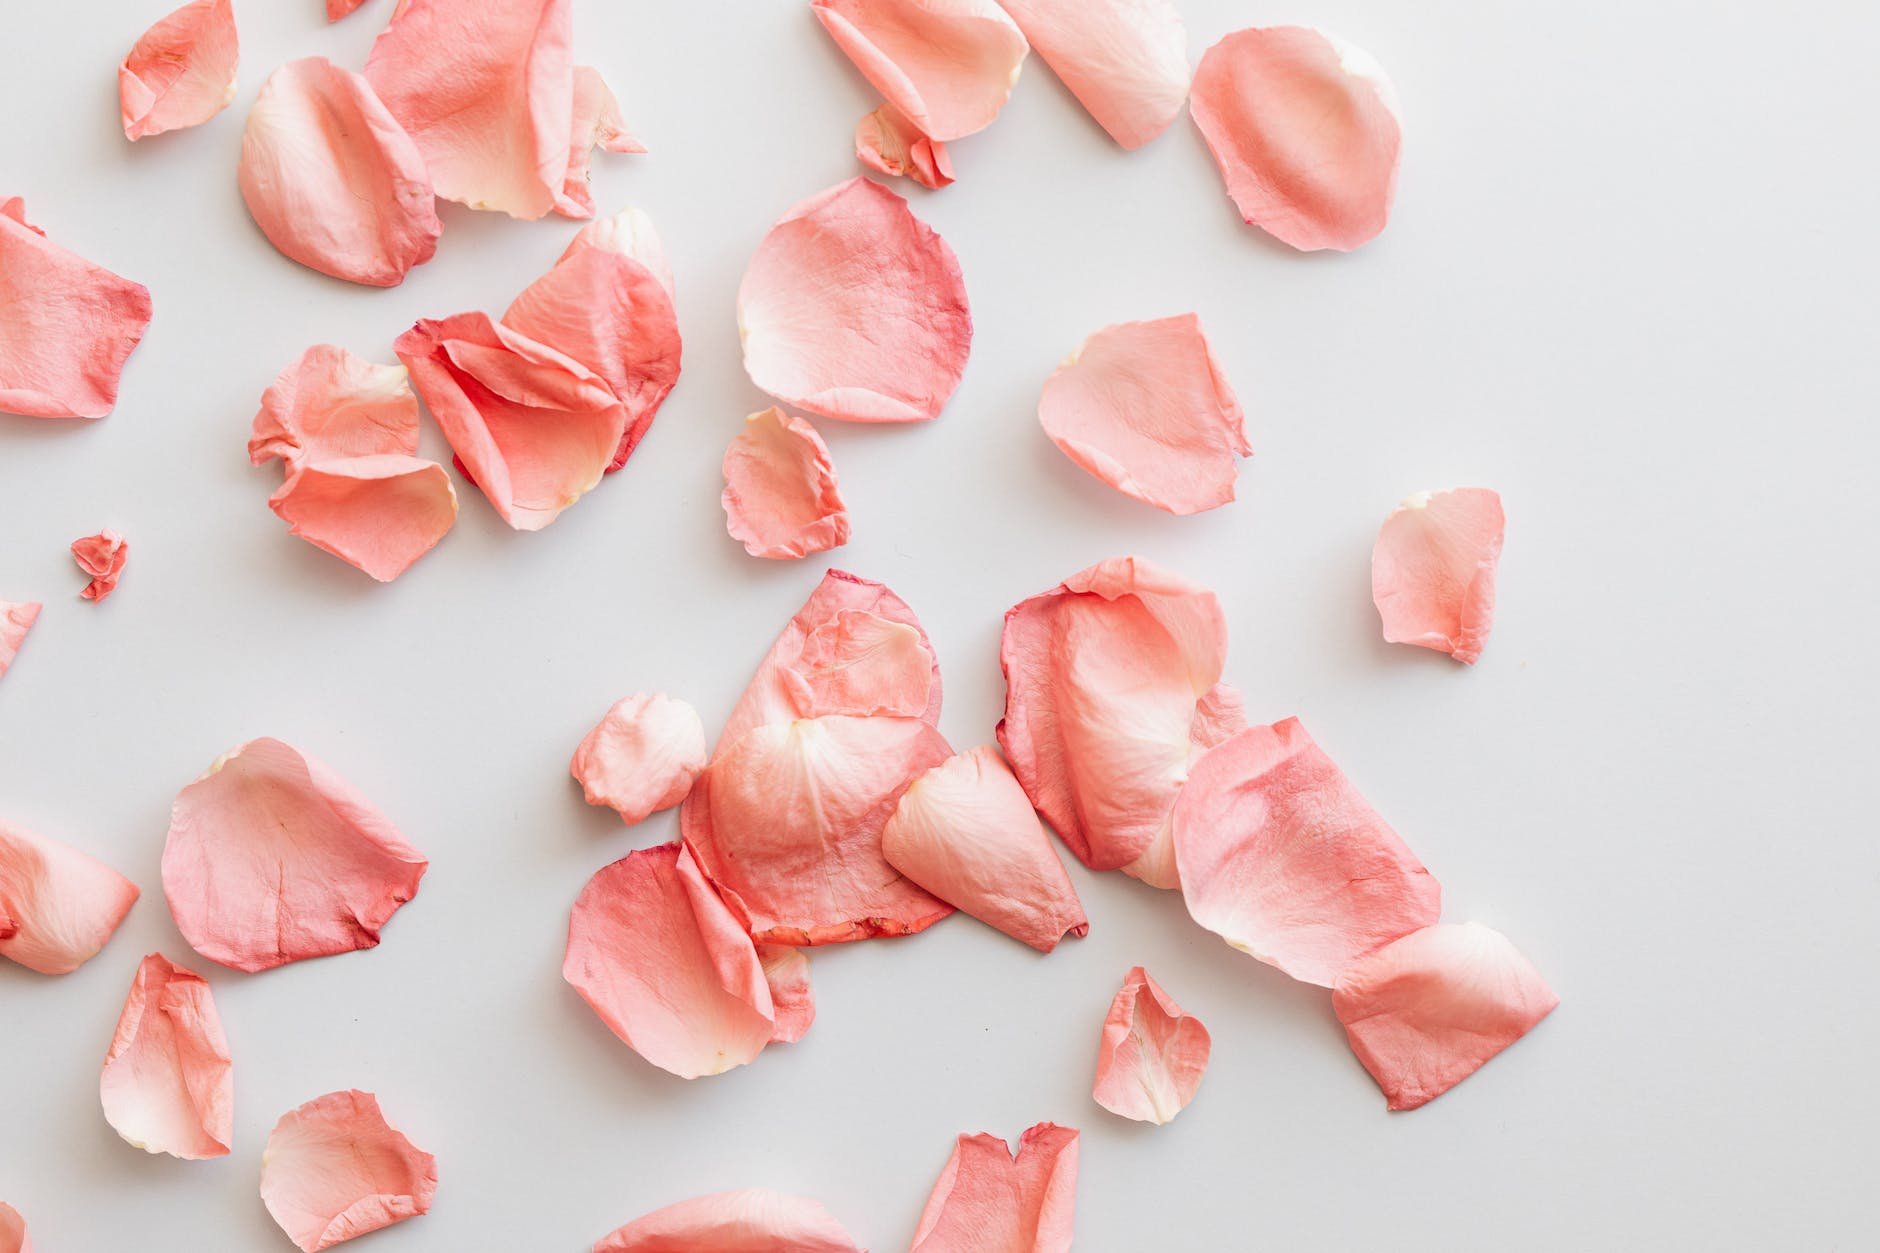 scattered rose petals on white surface